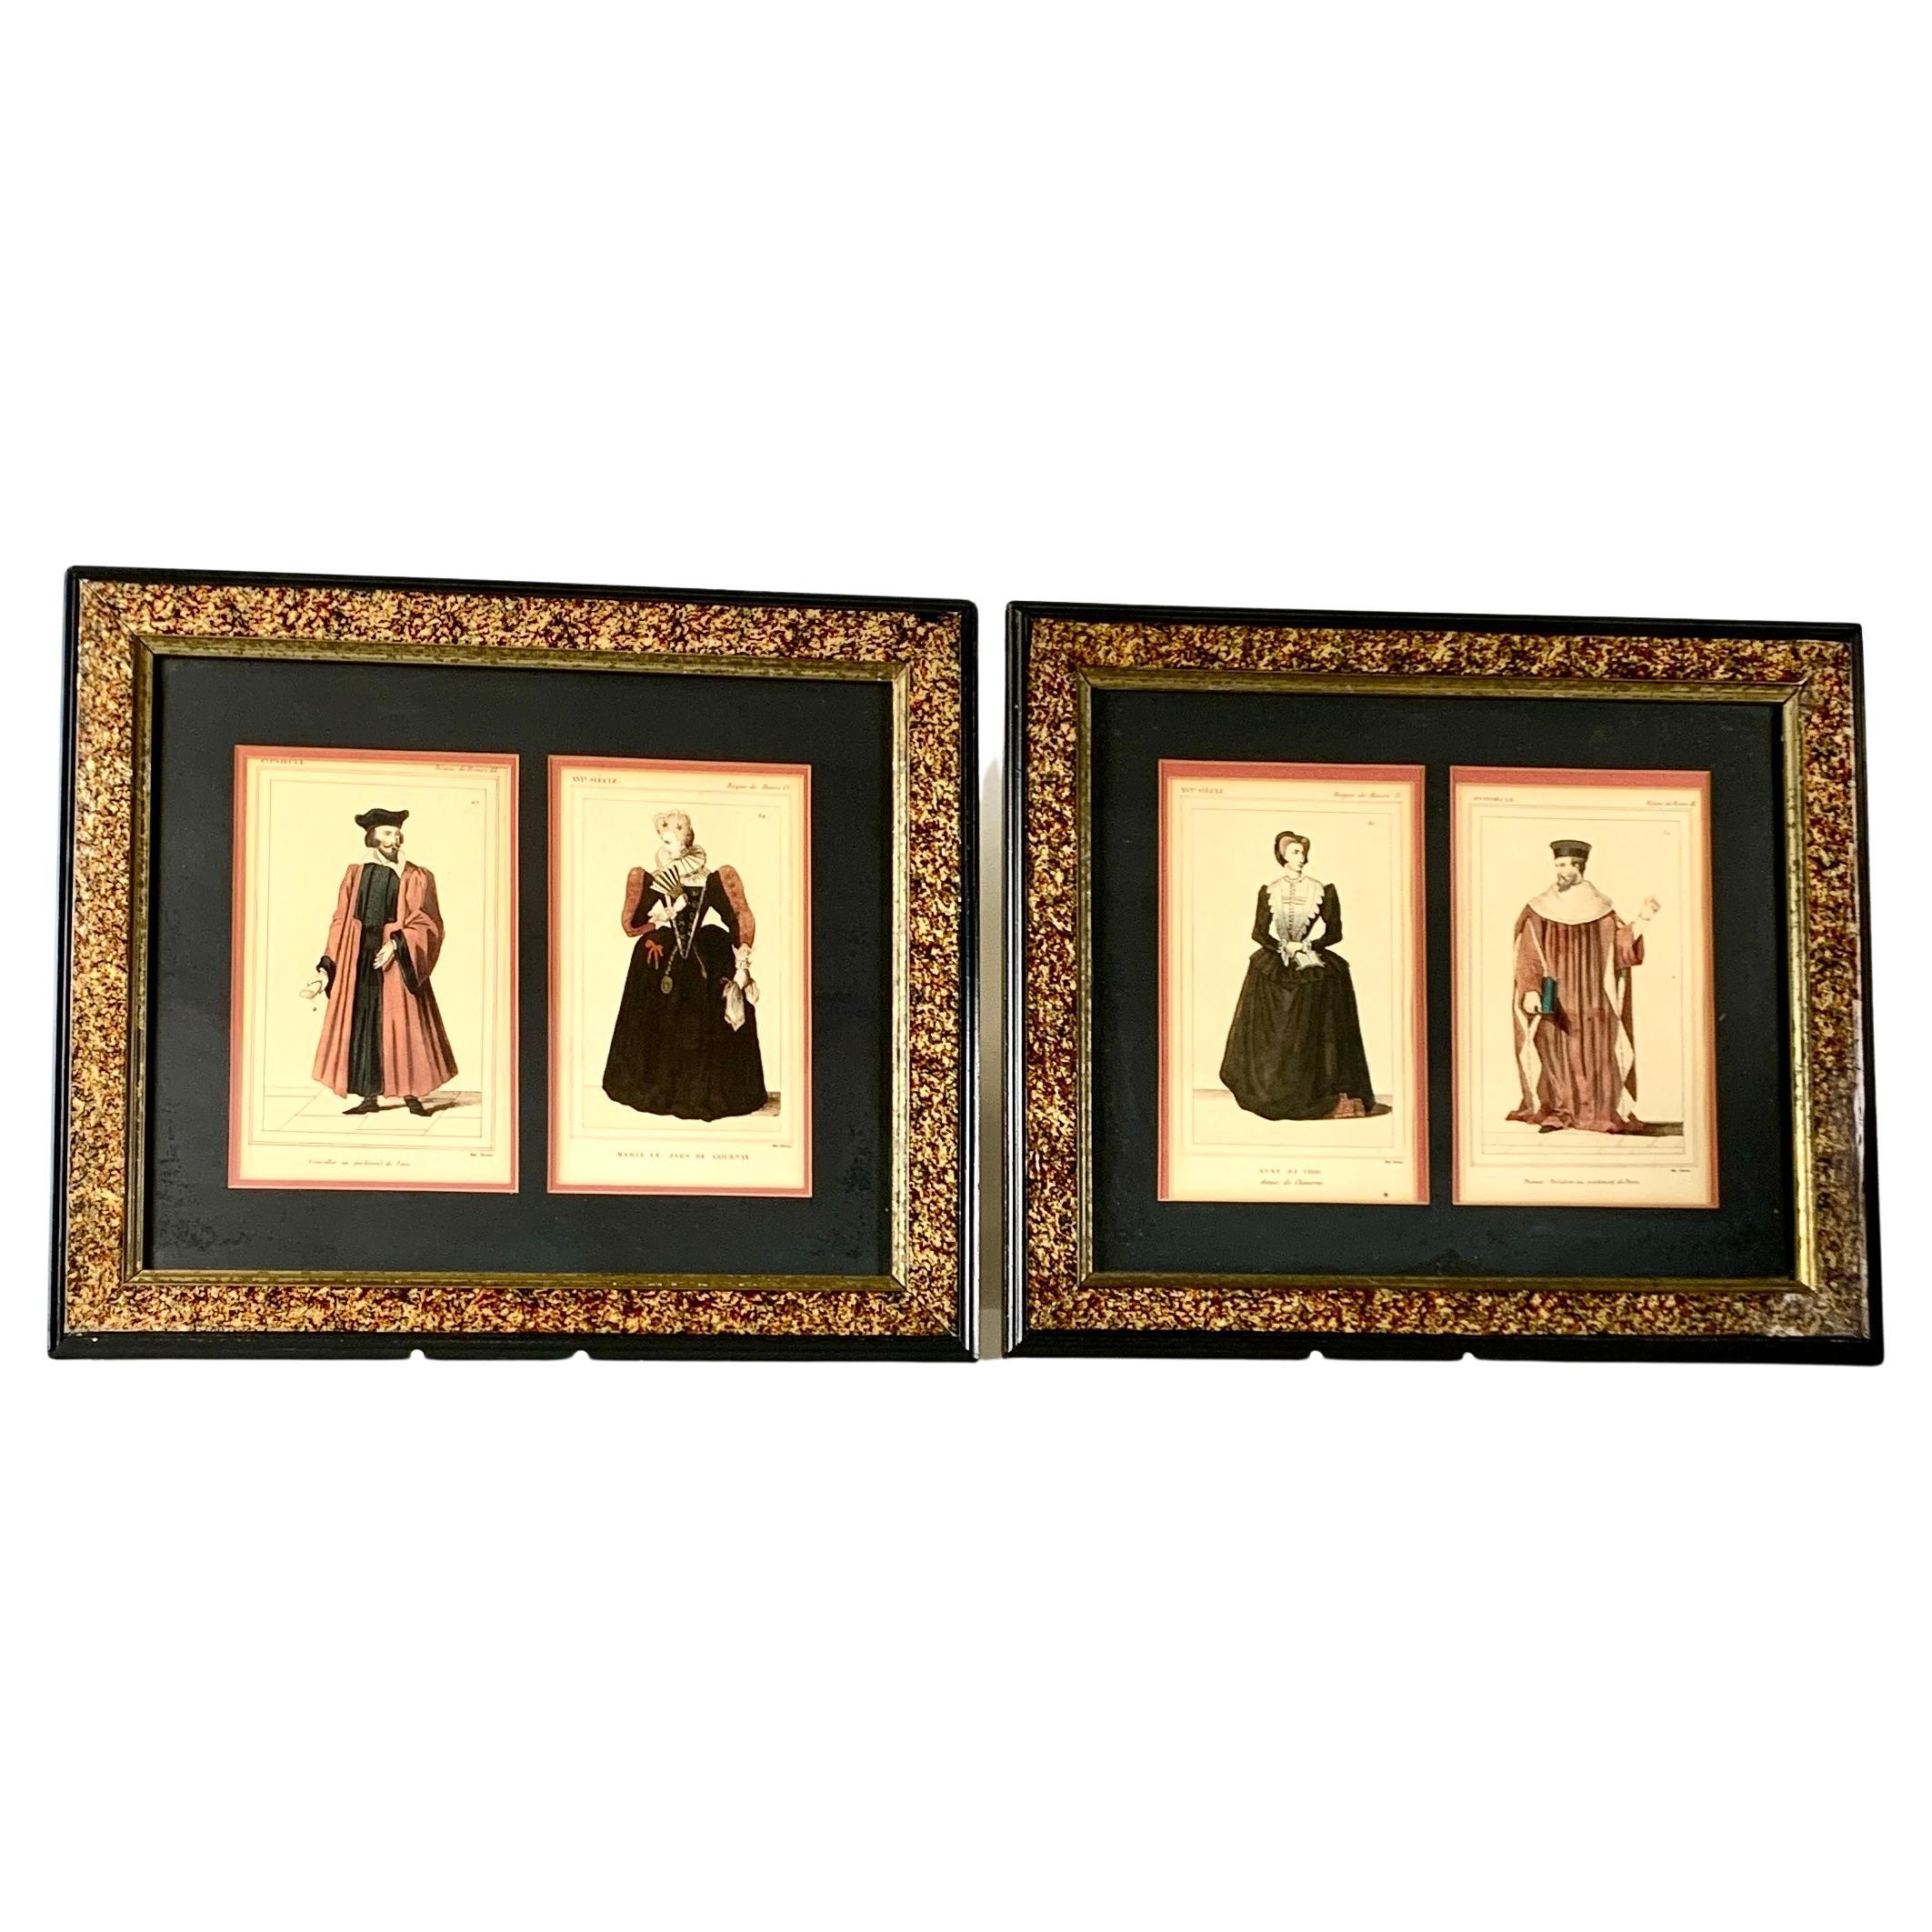 Pair Prints of French Noble Couples of 16th Century Made Mid-19th Century France For Sale